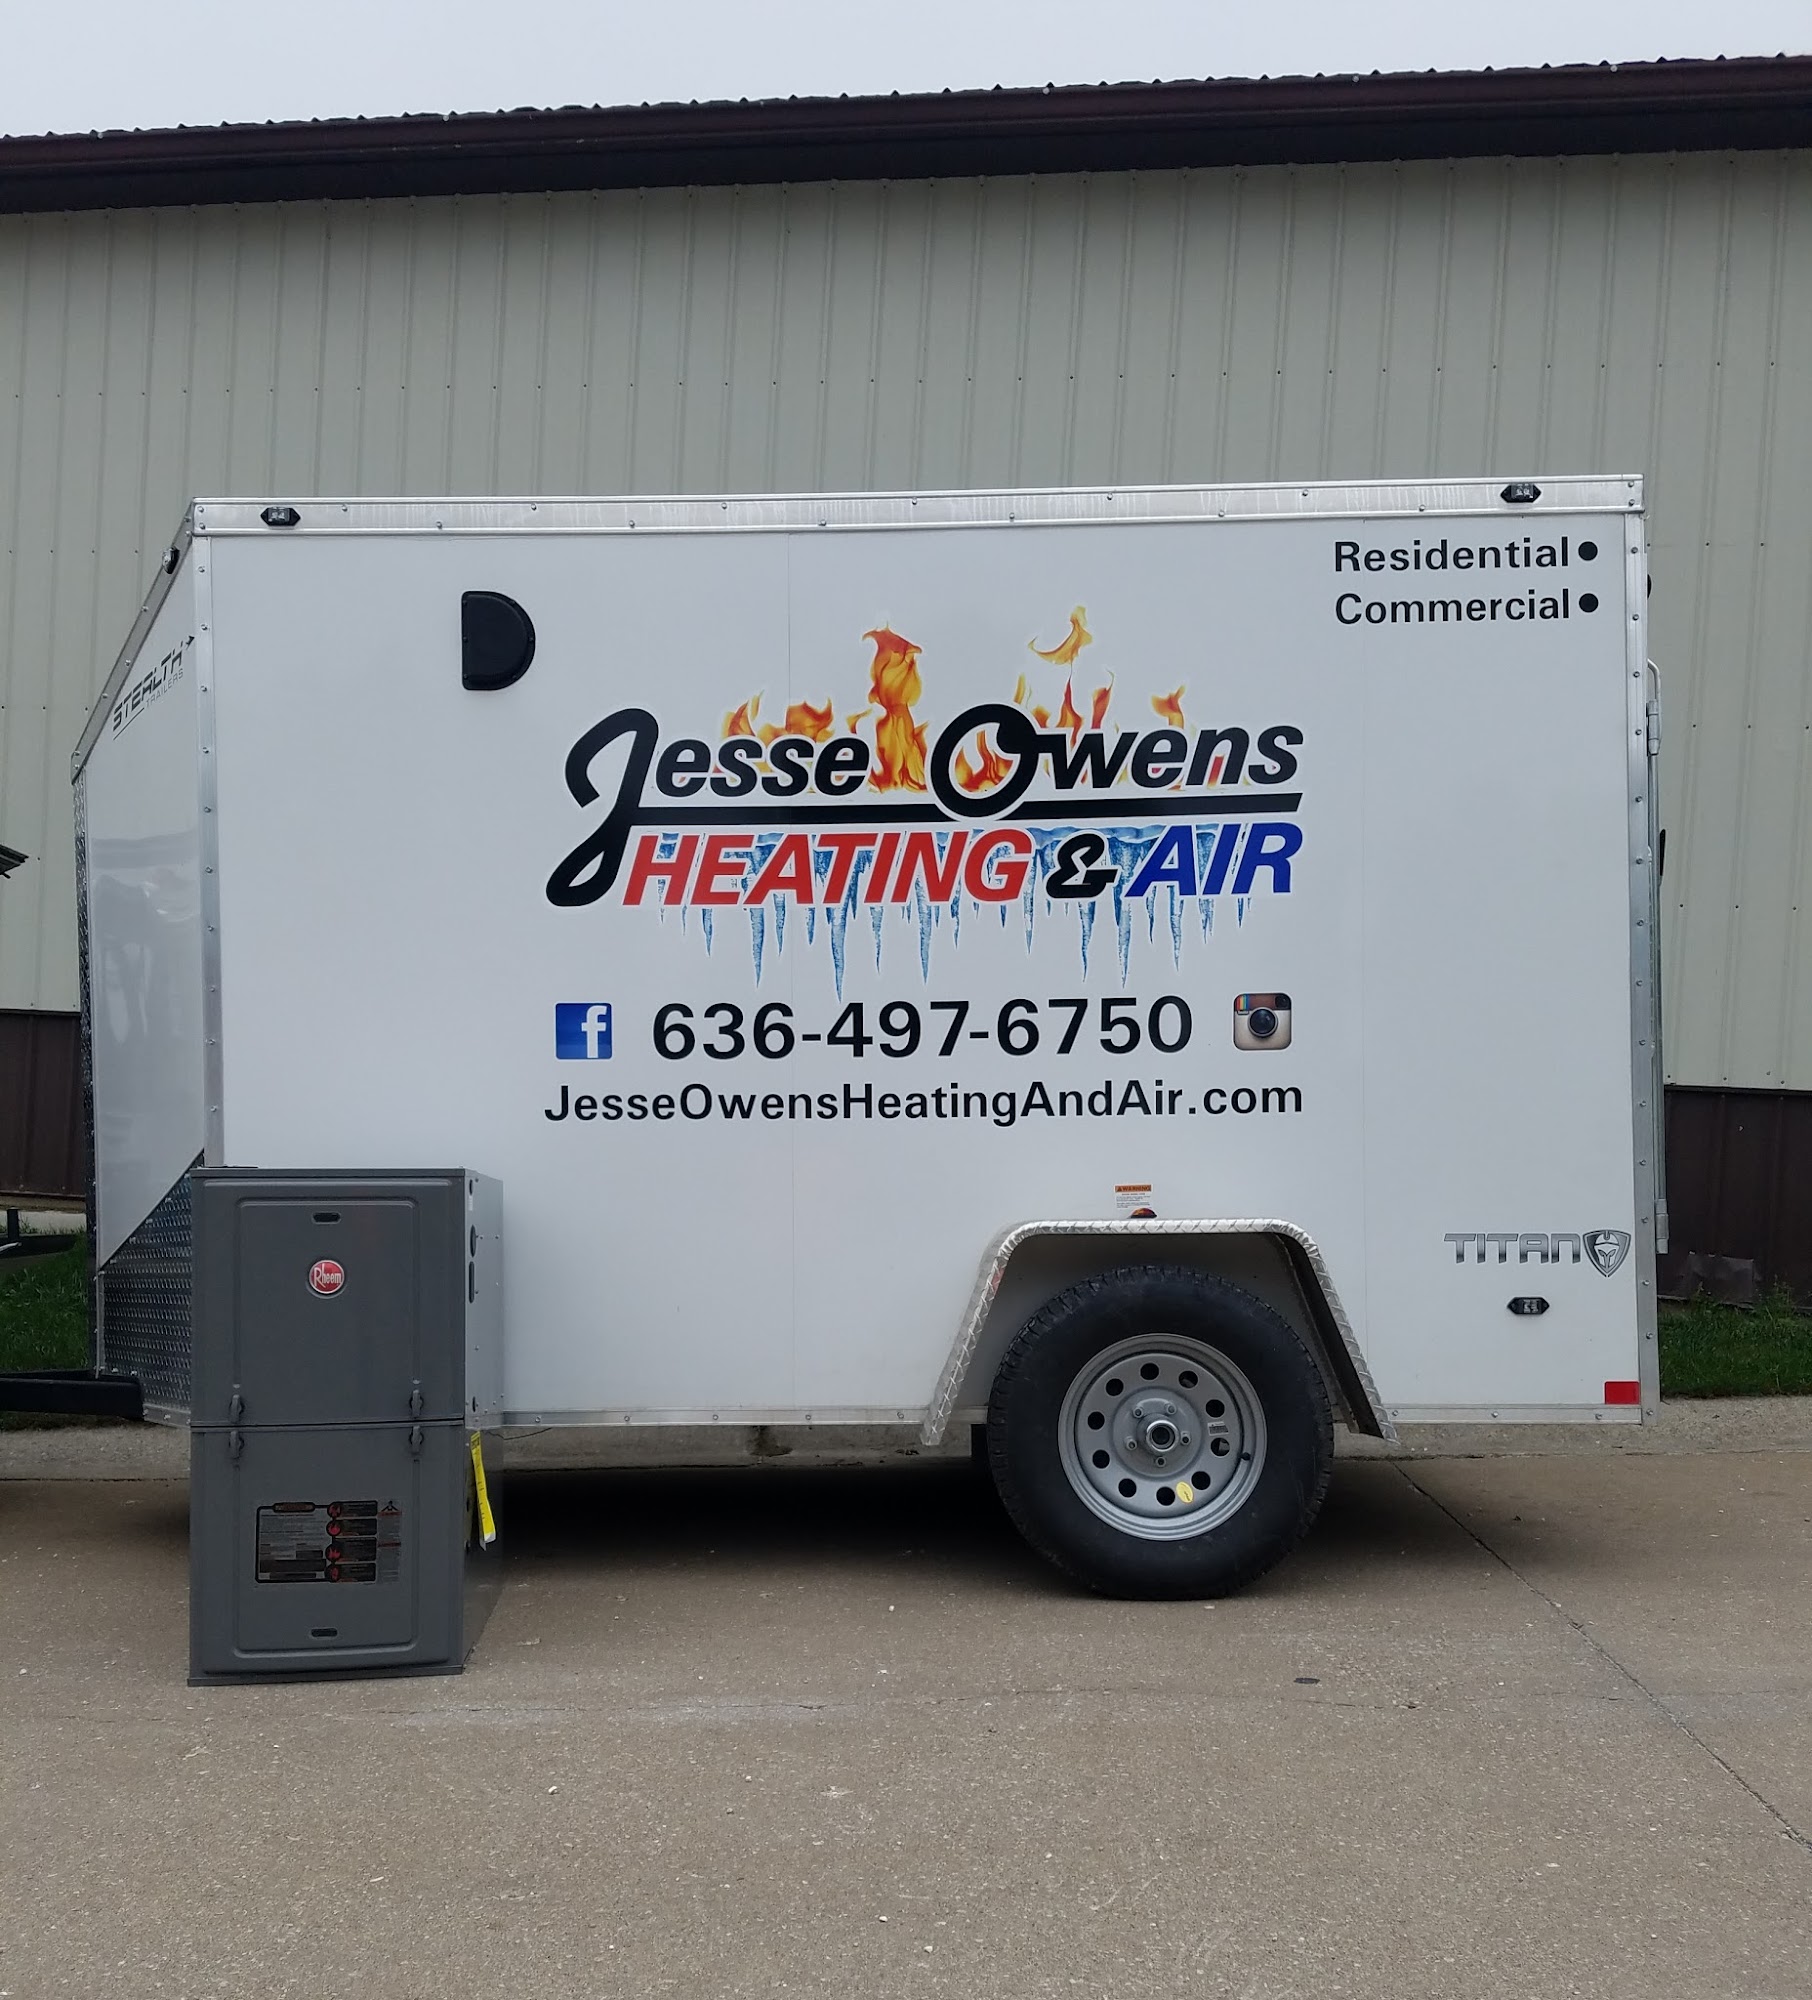 Jesse Owens Heating And Air